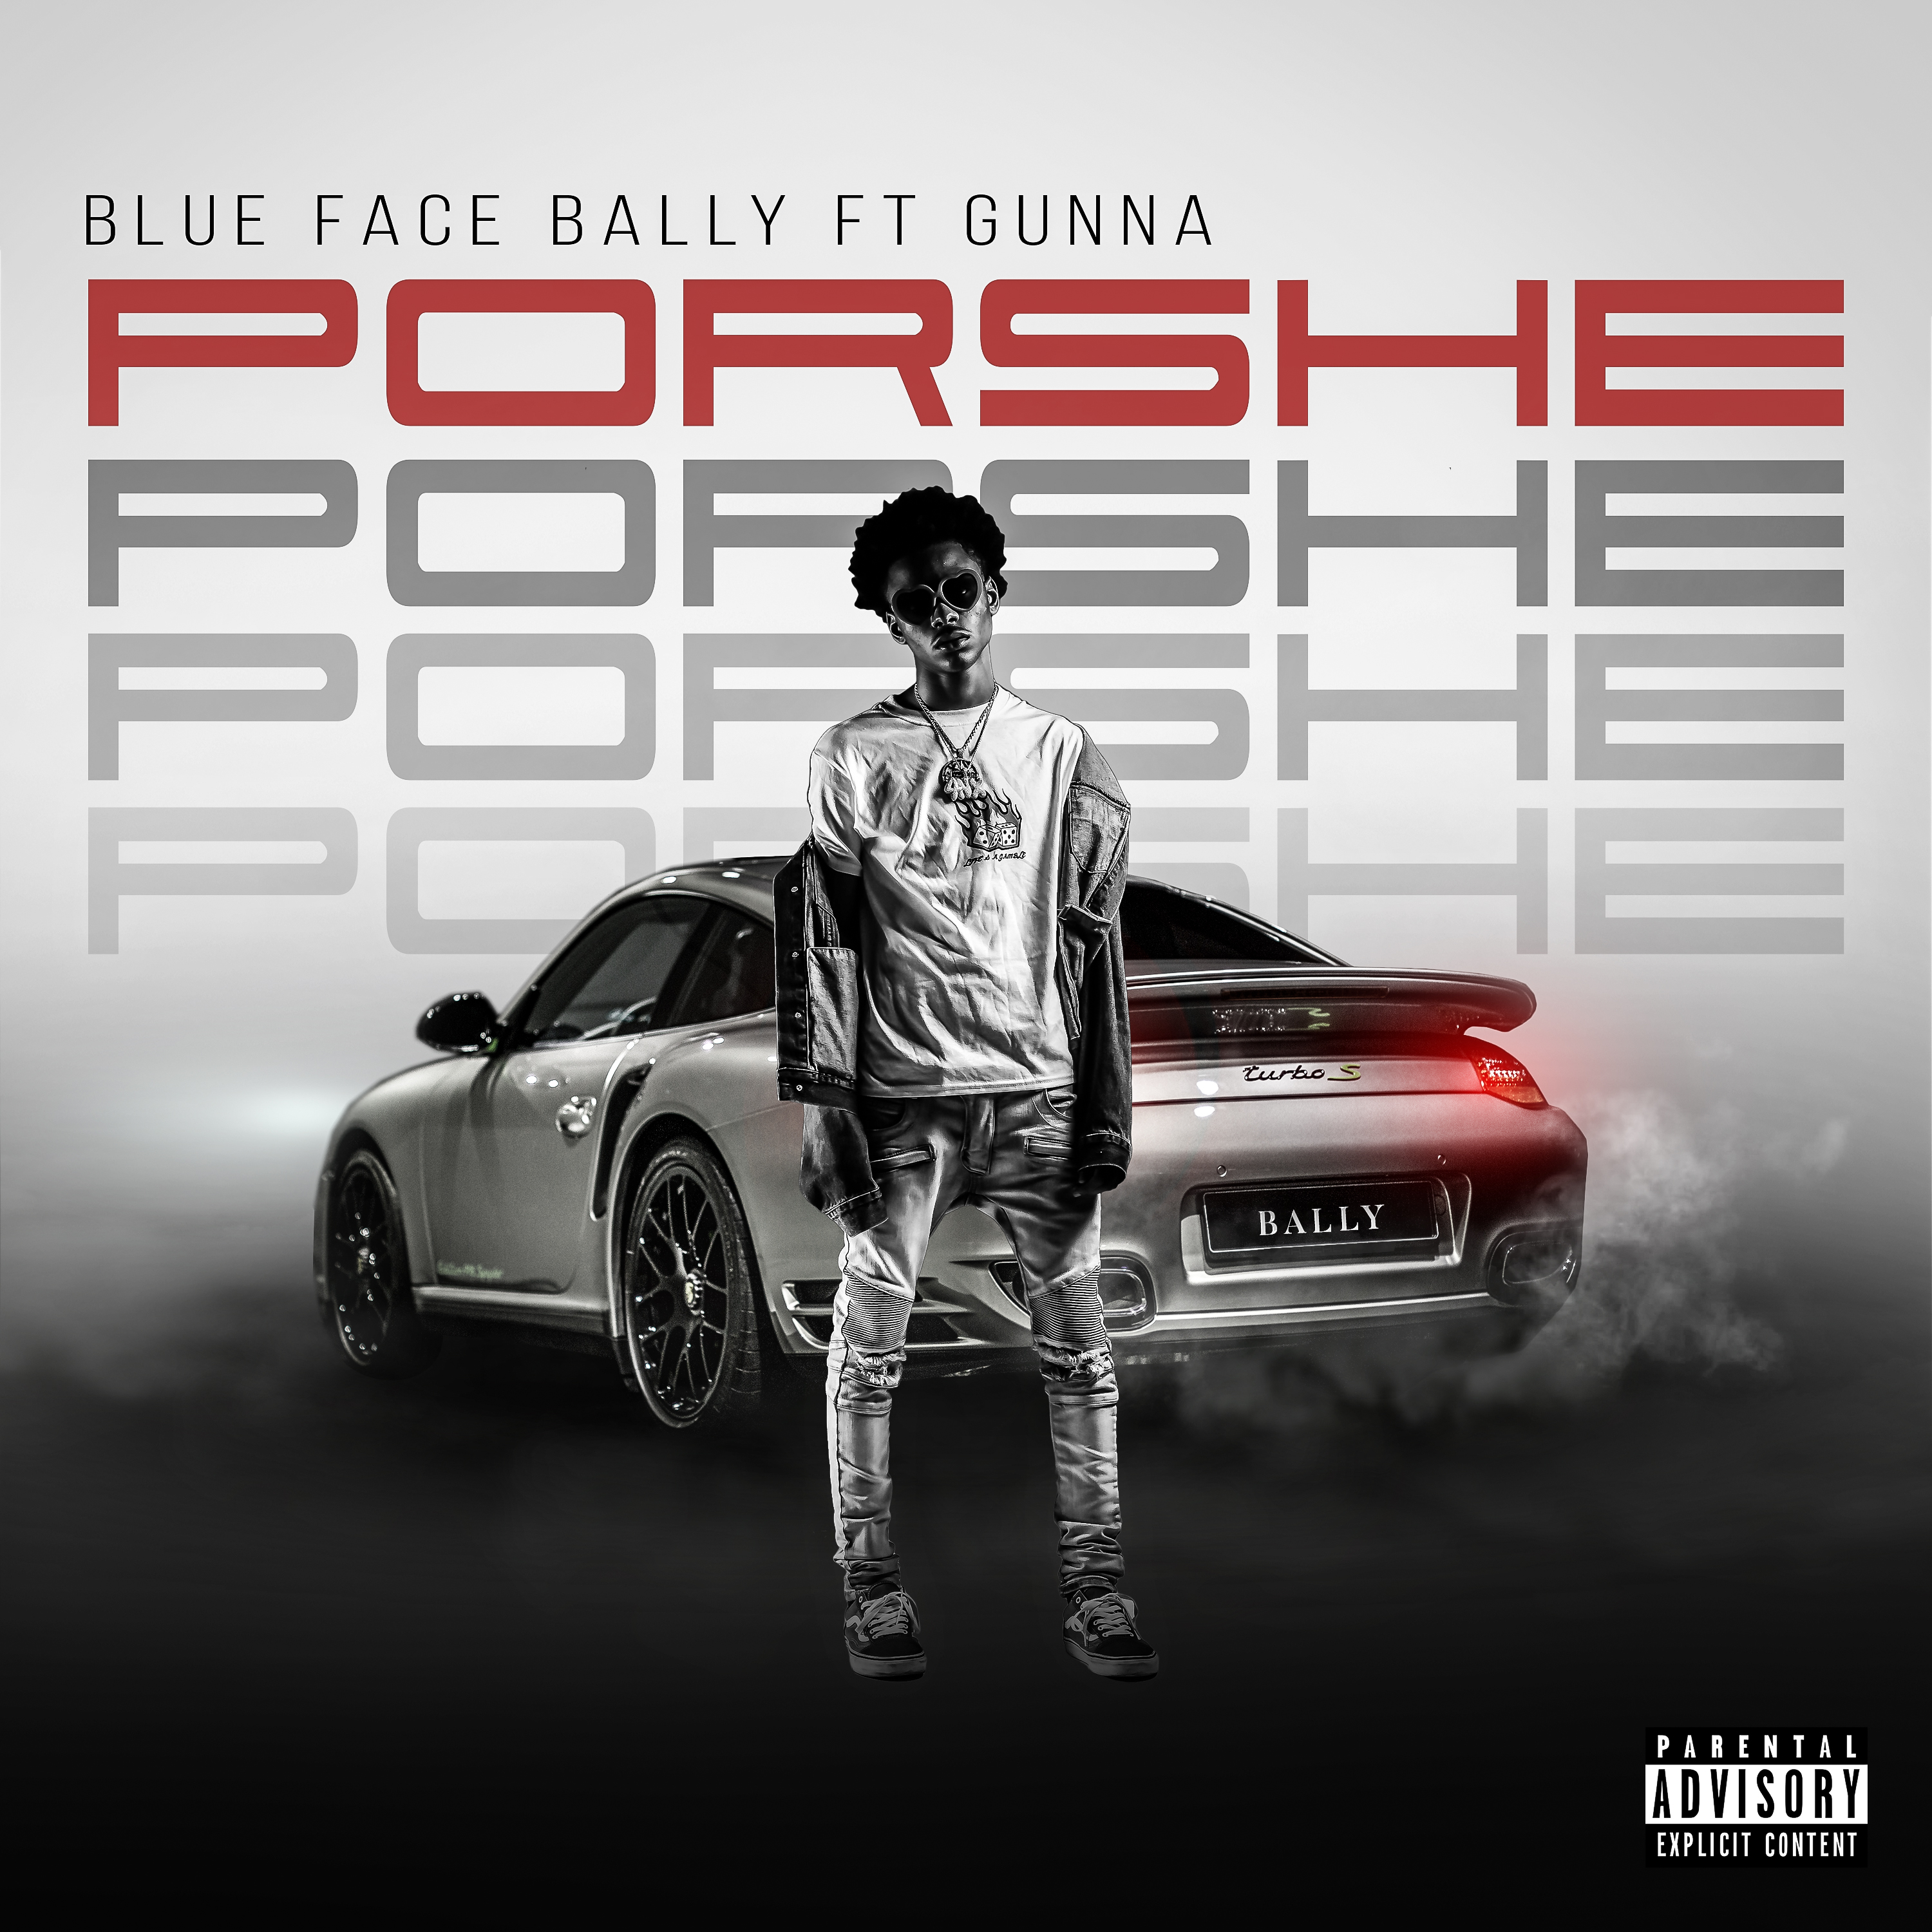 BlueFaceBally & Gunna Team Up For “Porshe” Produced By Dun Deal, Fuse of 808 Mafia, & Blessed [AUDIO]